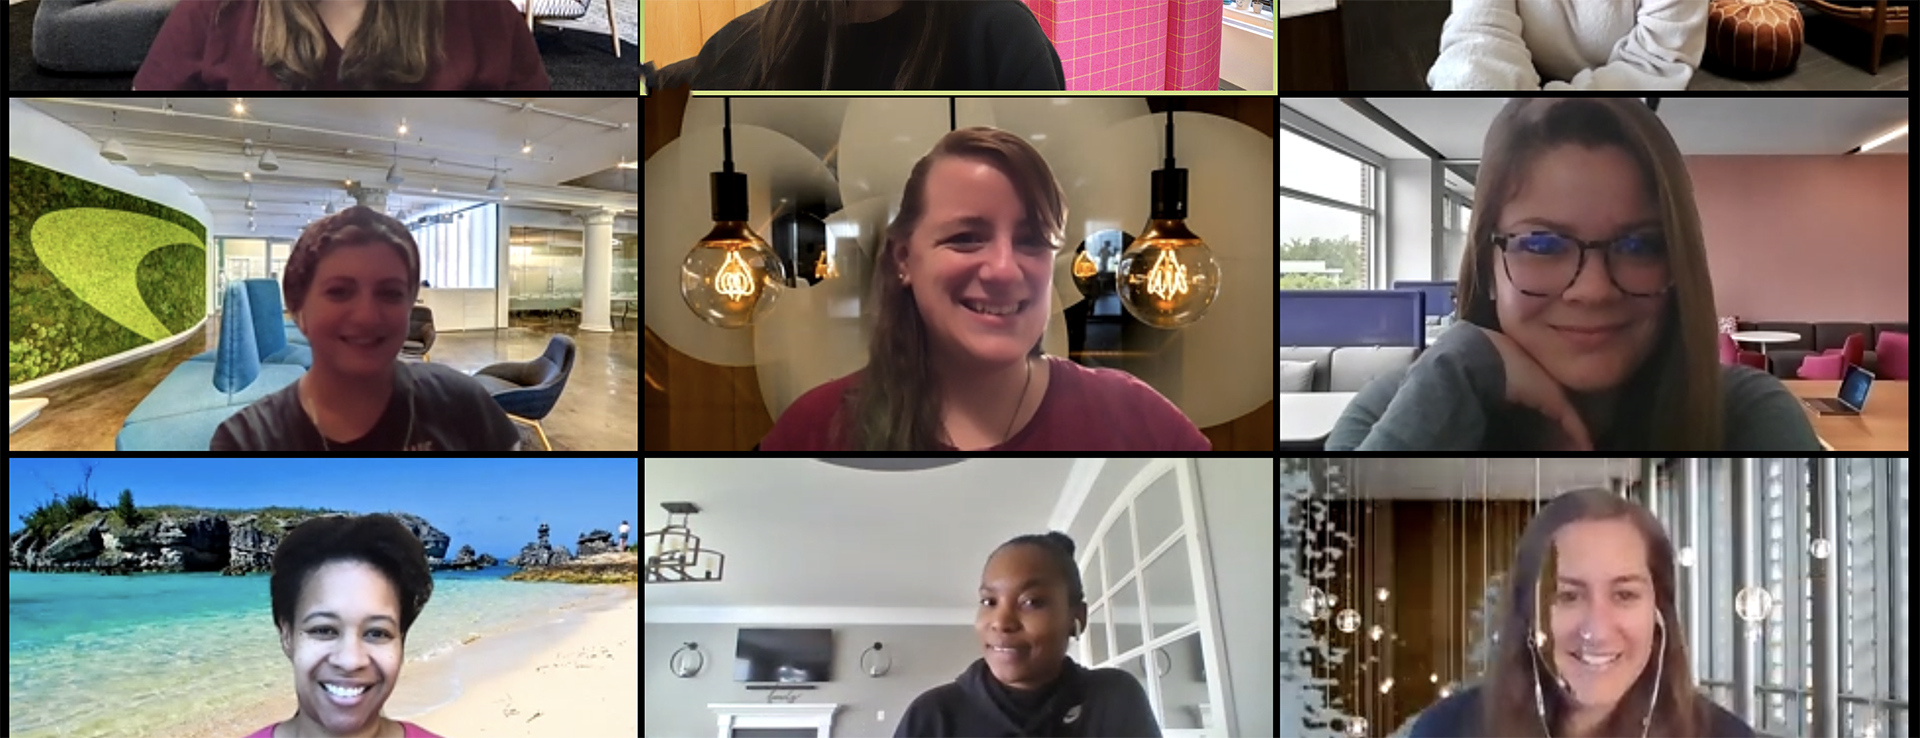 Capital One provides Zoom backgrounds for virtual interviews and meetings